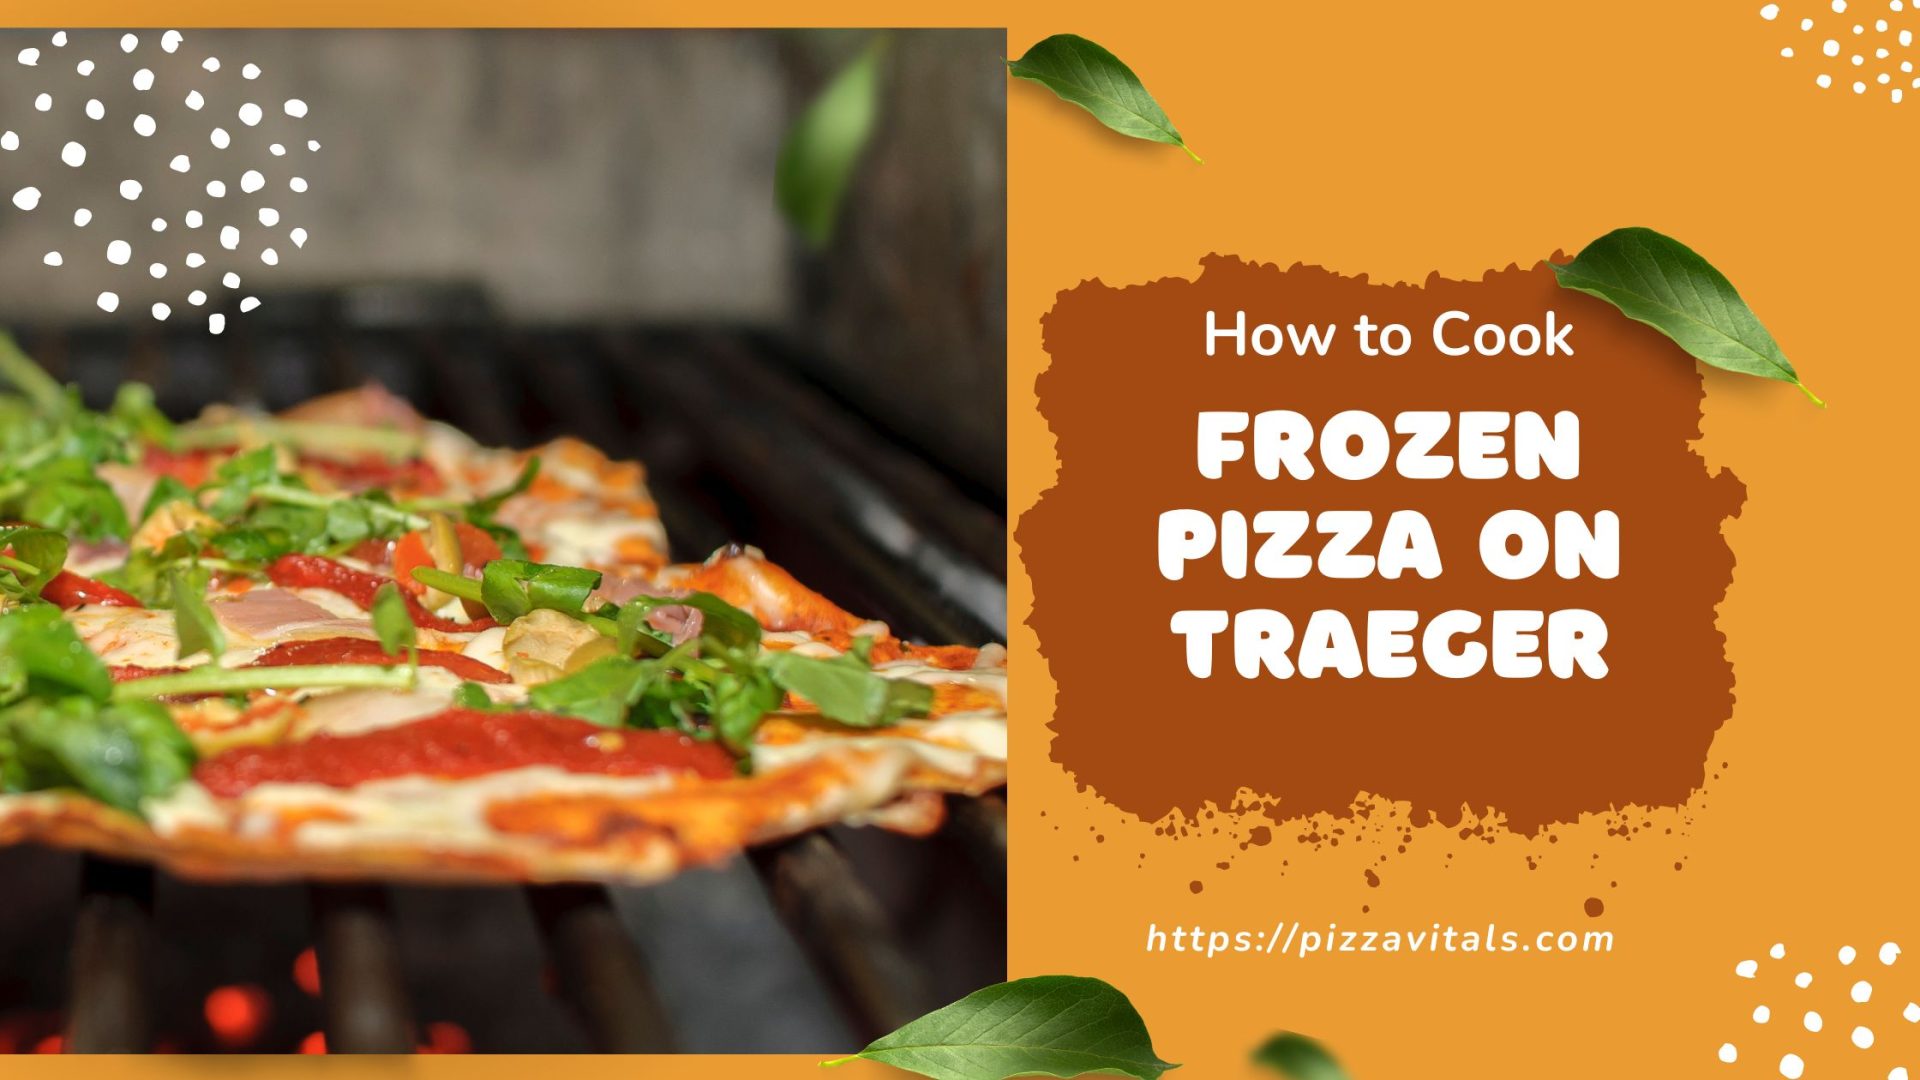 How to Make Mouthwatering Frozen Pizza on Traeger Grill!